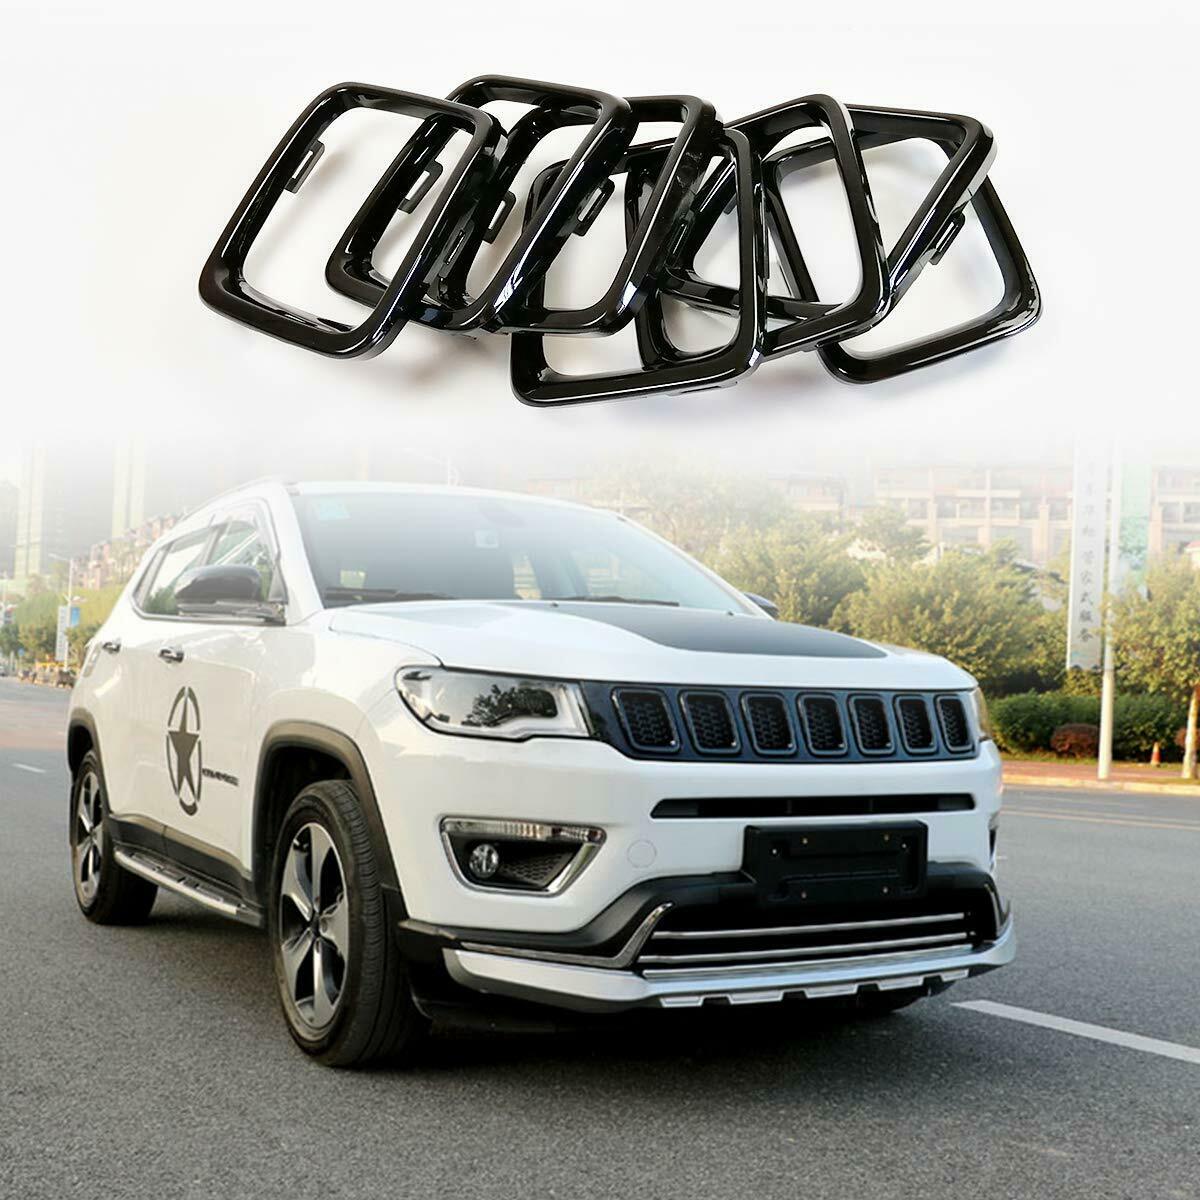 WeifangInspire Fits for 2017-2018 Jeep Compass Black Front Grill Grille Cover Trim 7Pcs Grill Inserts 